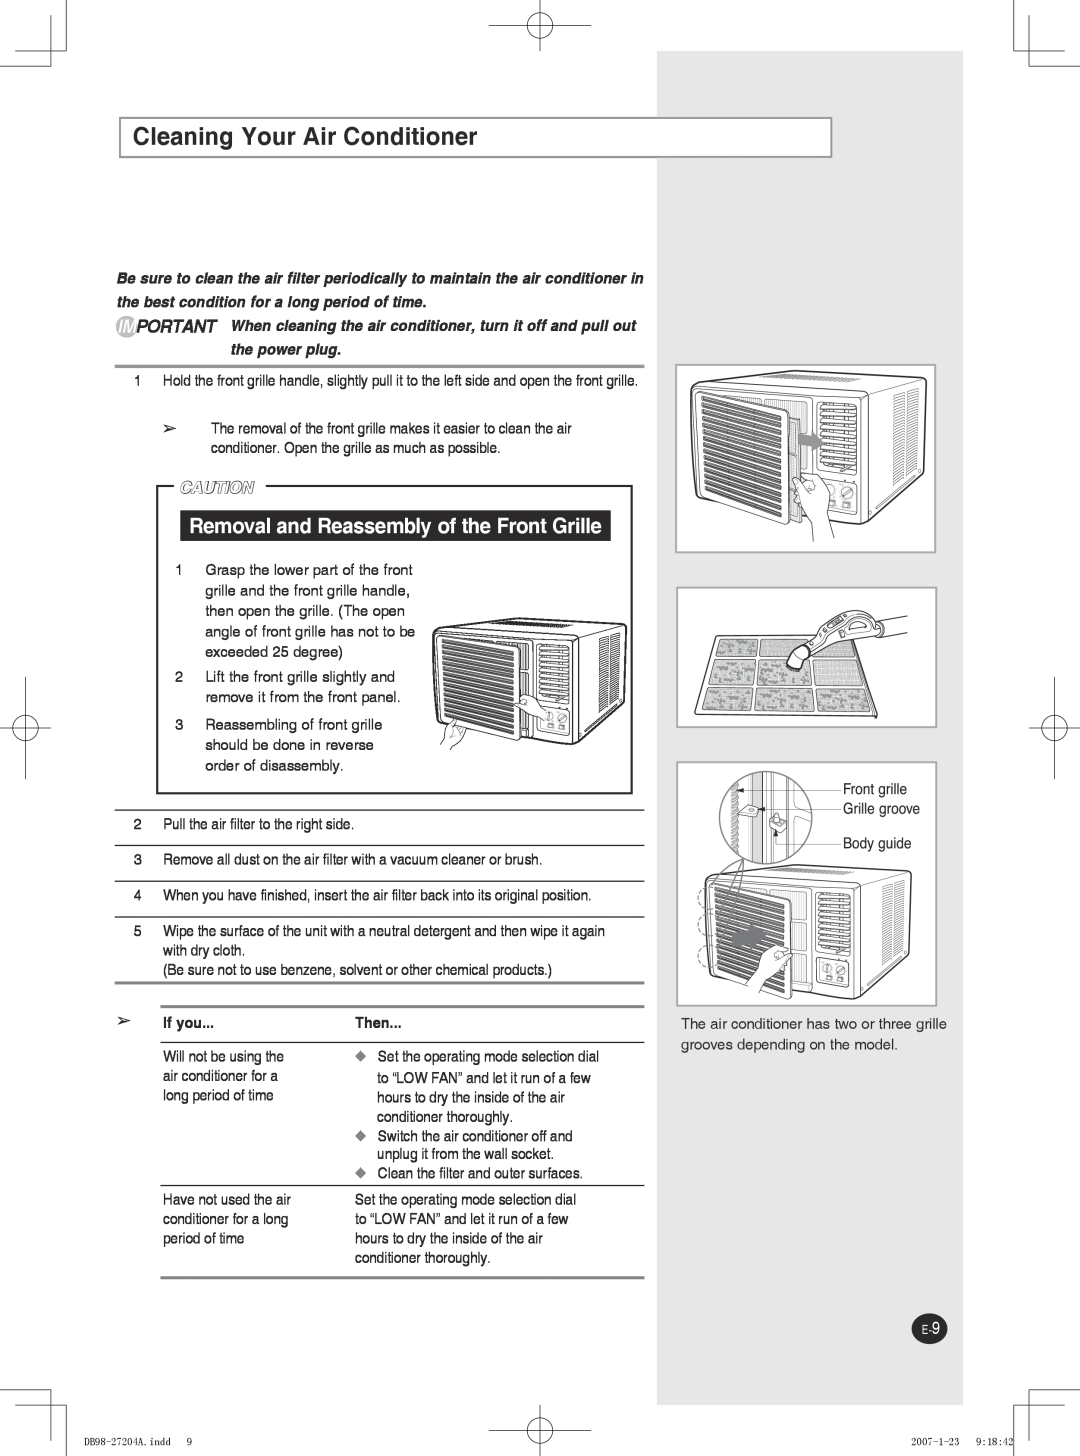 Samsung AW12P2, AW09P2, AW07P2 user manual Cleaning Your Air Conditioner, Removal and Reassembly of the Front Grille 